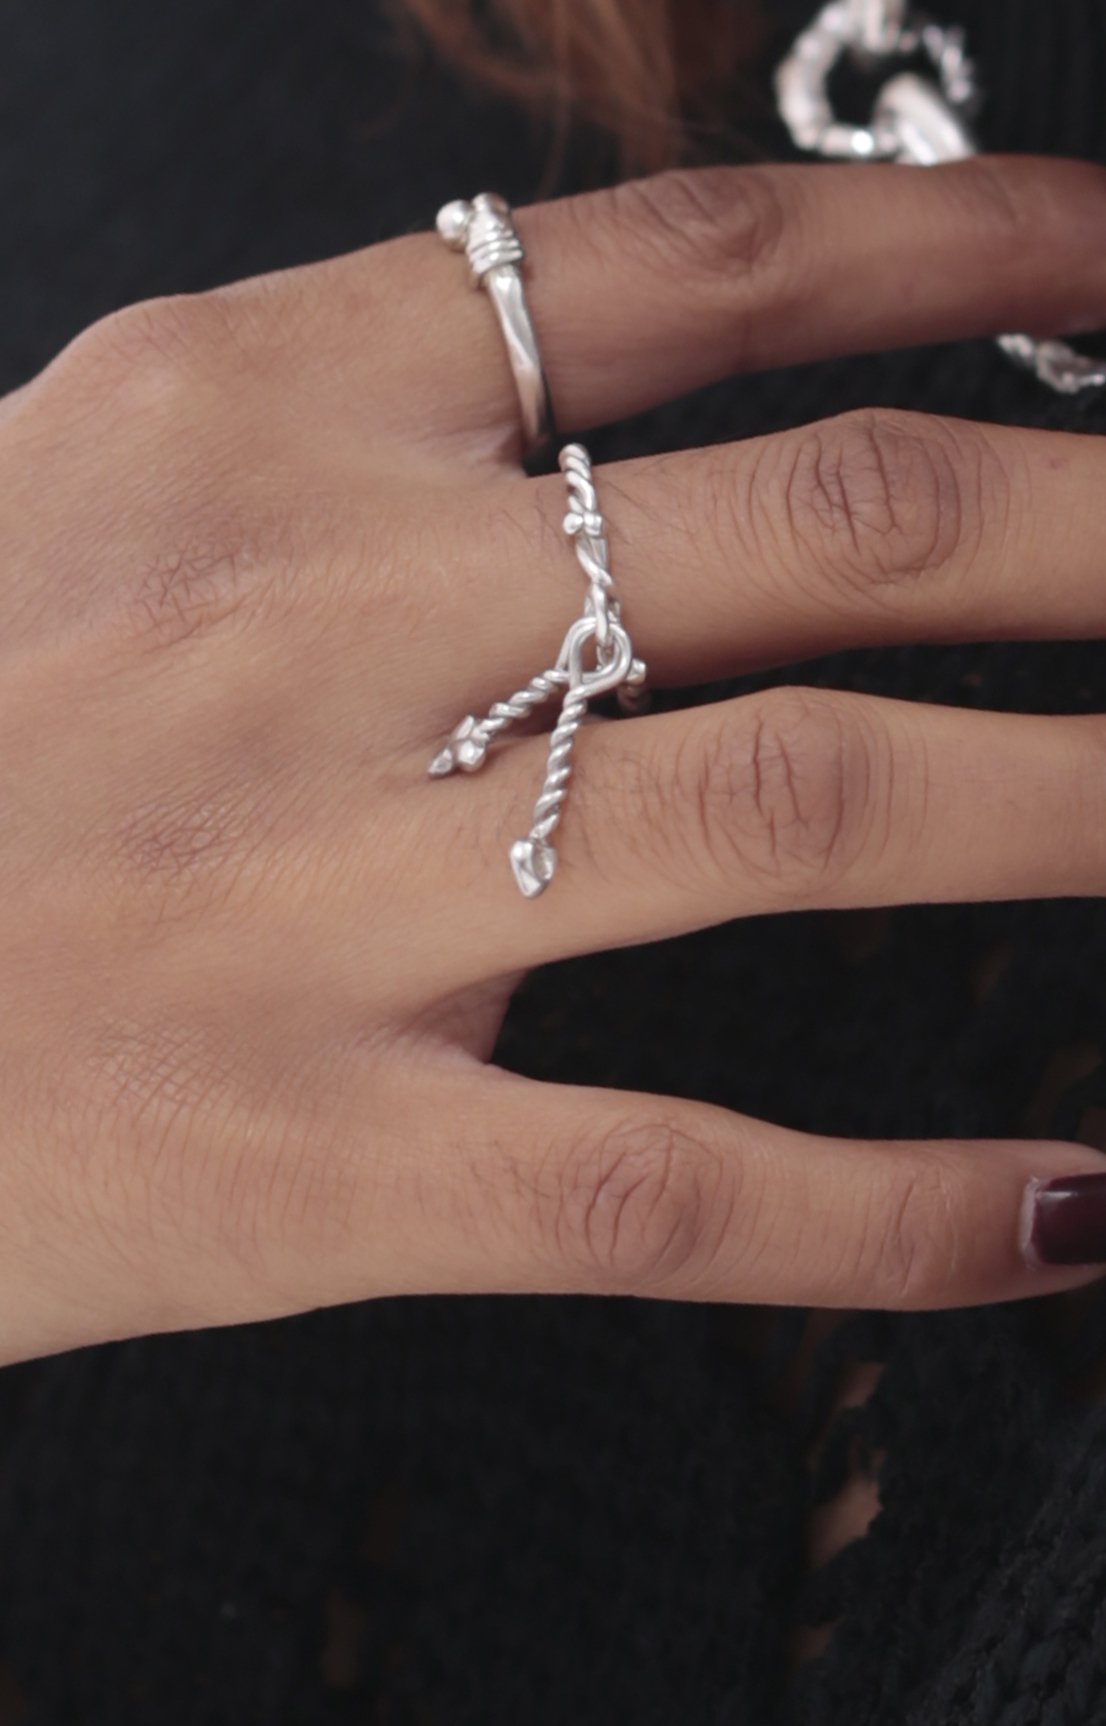 Model wears the Twisted Charm Ring by CLARK in Sterling Silver on her middle finger. Handcrafted using the lost wax casting method, this classic and simple ring shows off two dangling charms. Model also wears Eros Ring by CLARK.